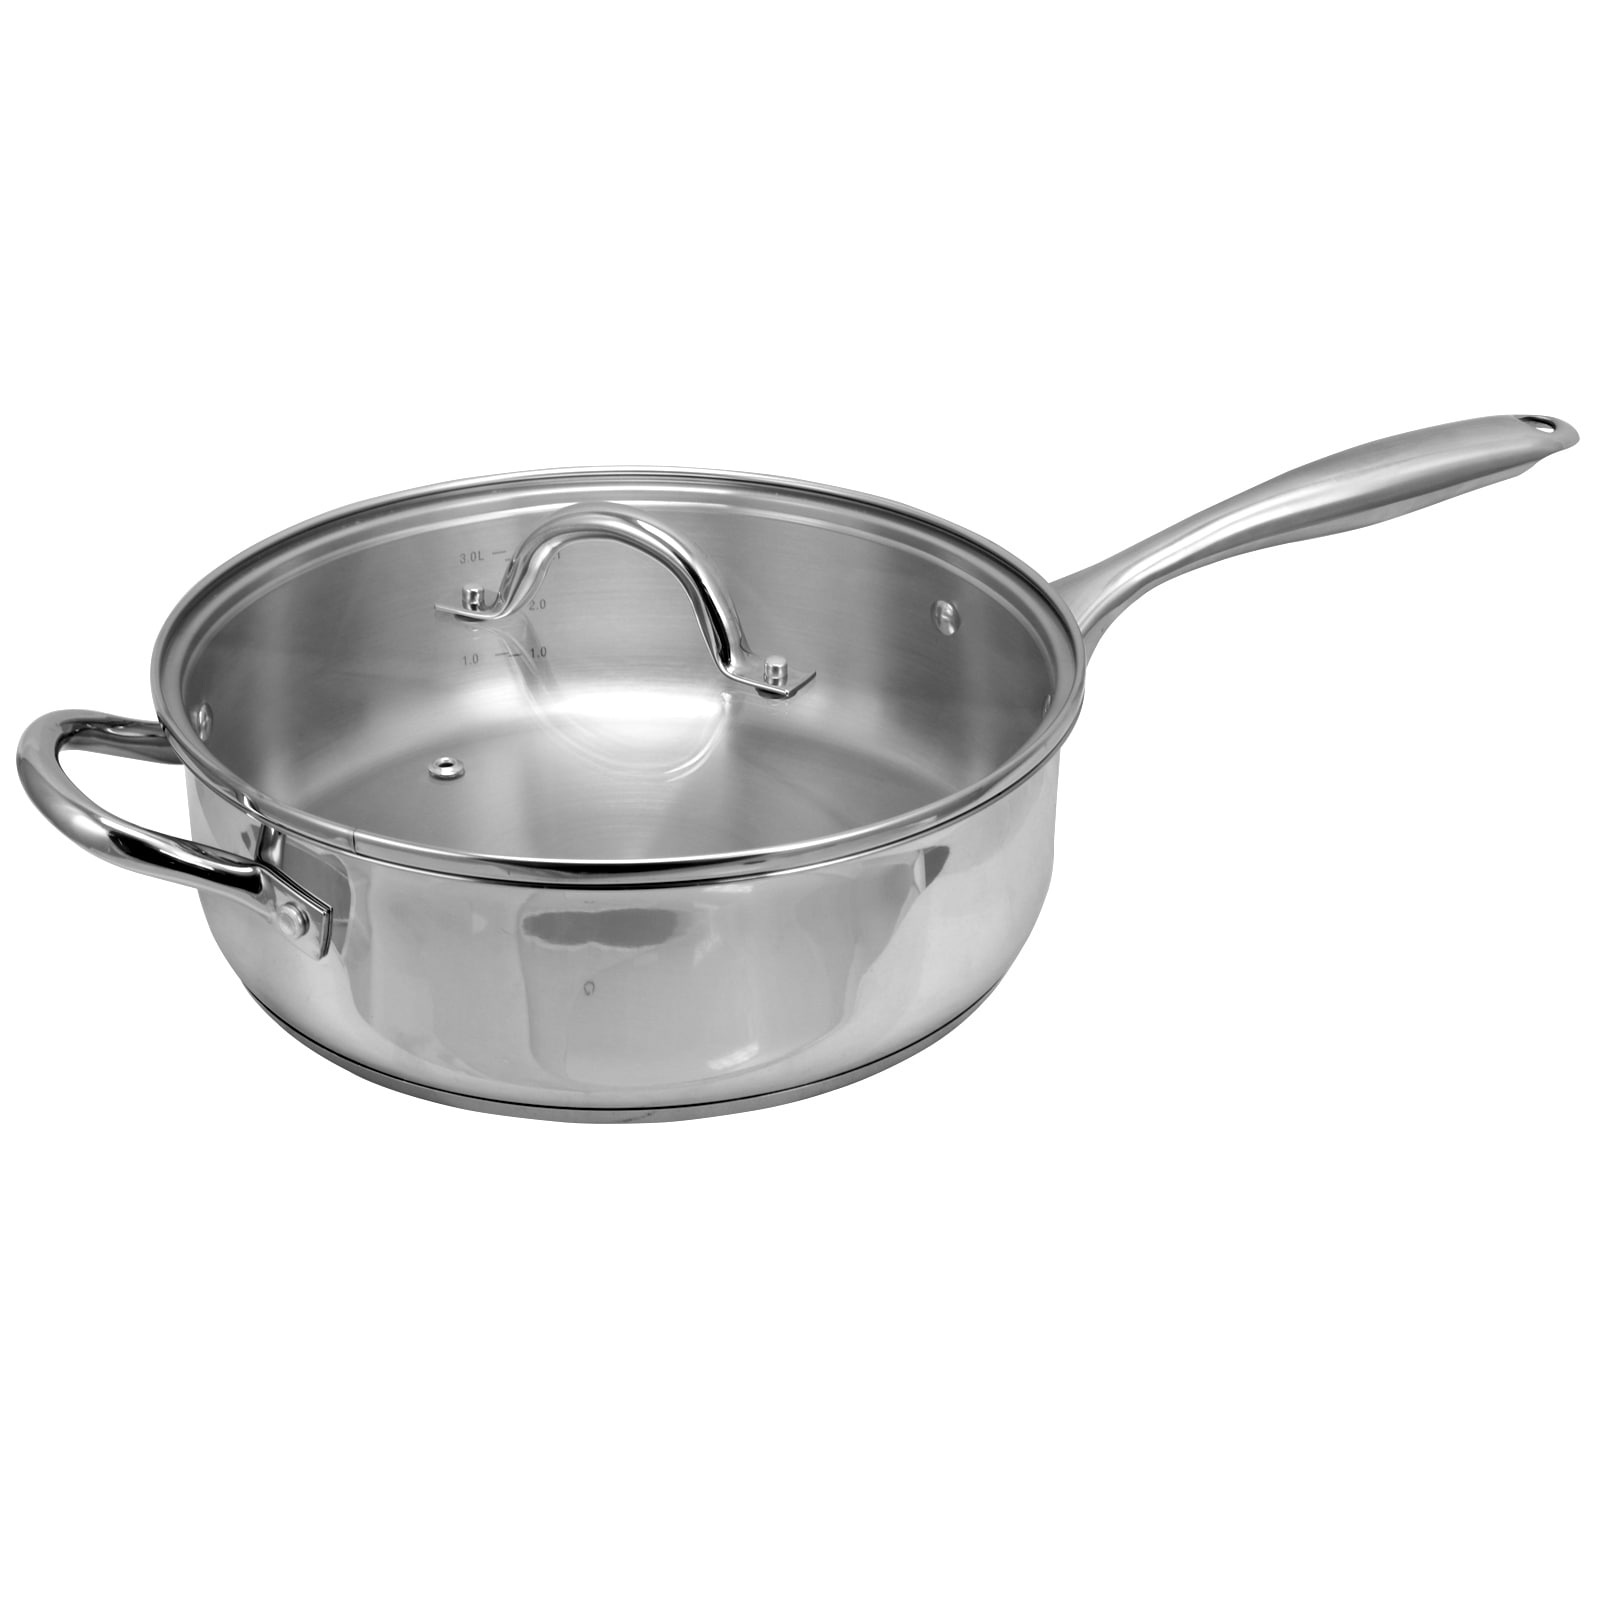 https://ak1.ostkcdn.com/images/products/is/images/direct/cadfd48ee2ac9f8eb373986b66d0b21b5b5f1f11/Oster-Cuisine-Saunders-4.2-Quart-Saute-Pan-with-Lid.jpg